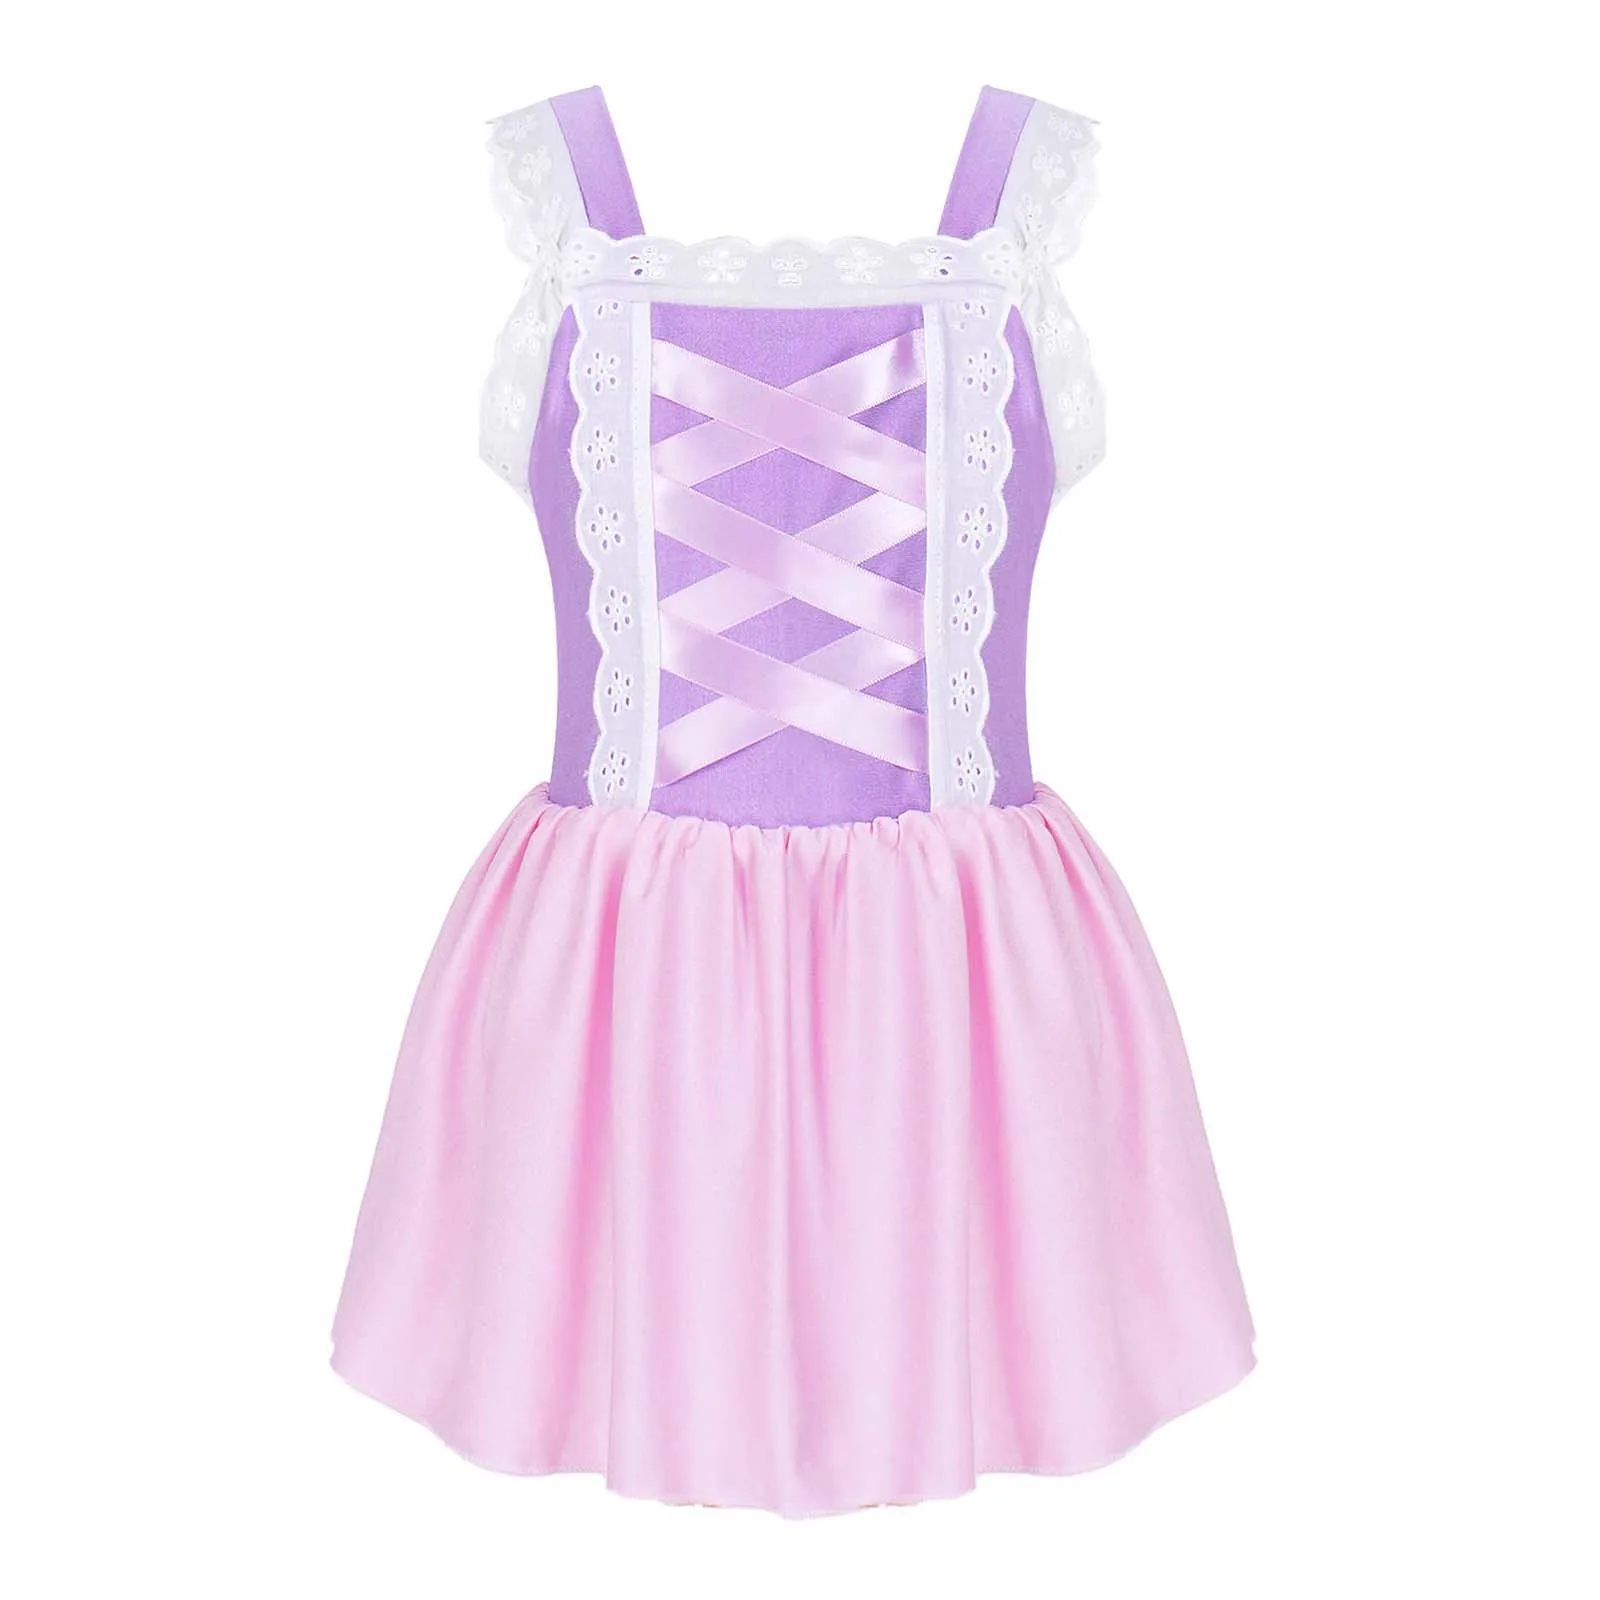 

Kid Girls Halloween Princess Costume Purple Cartoon Carnival Cosplay Leotard Dress for Themed Party Roleplay Dress Up Clothes